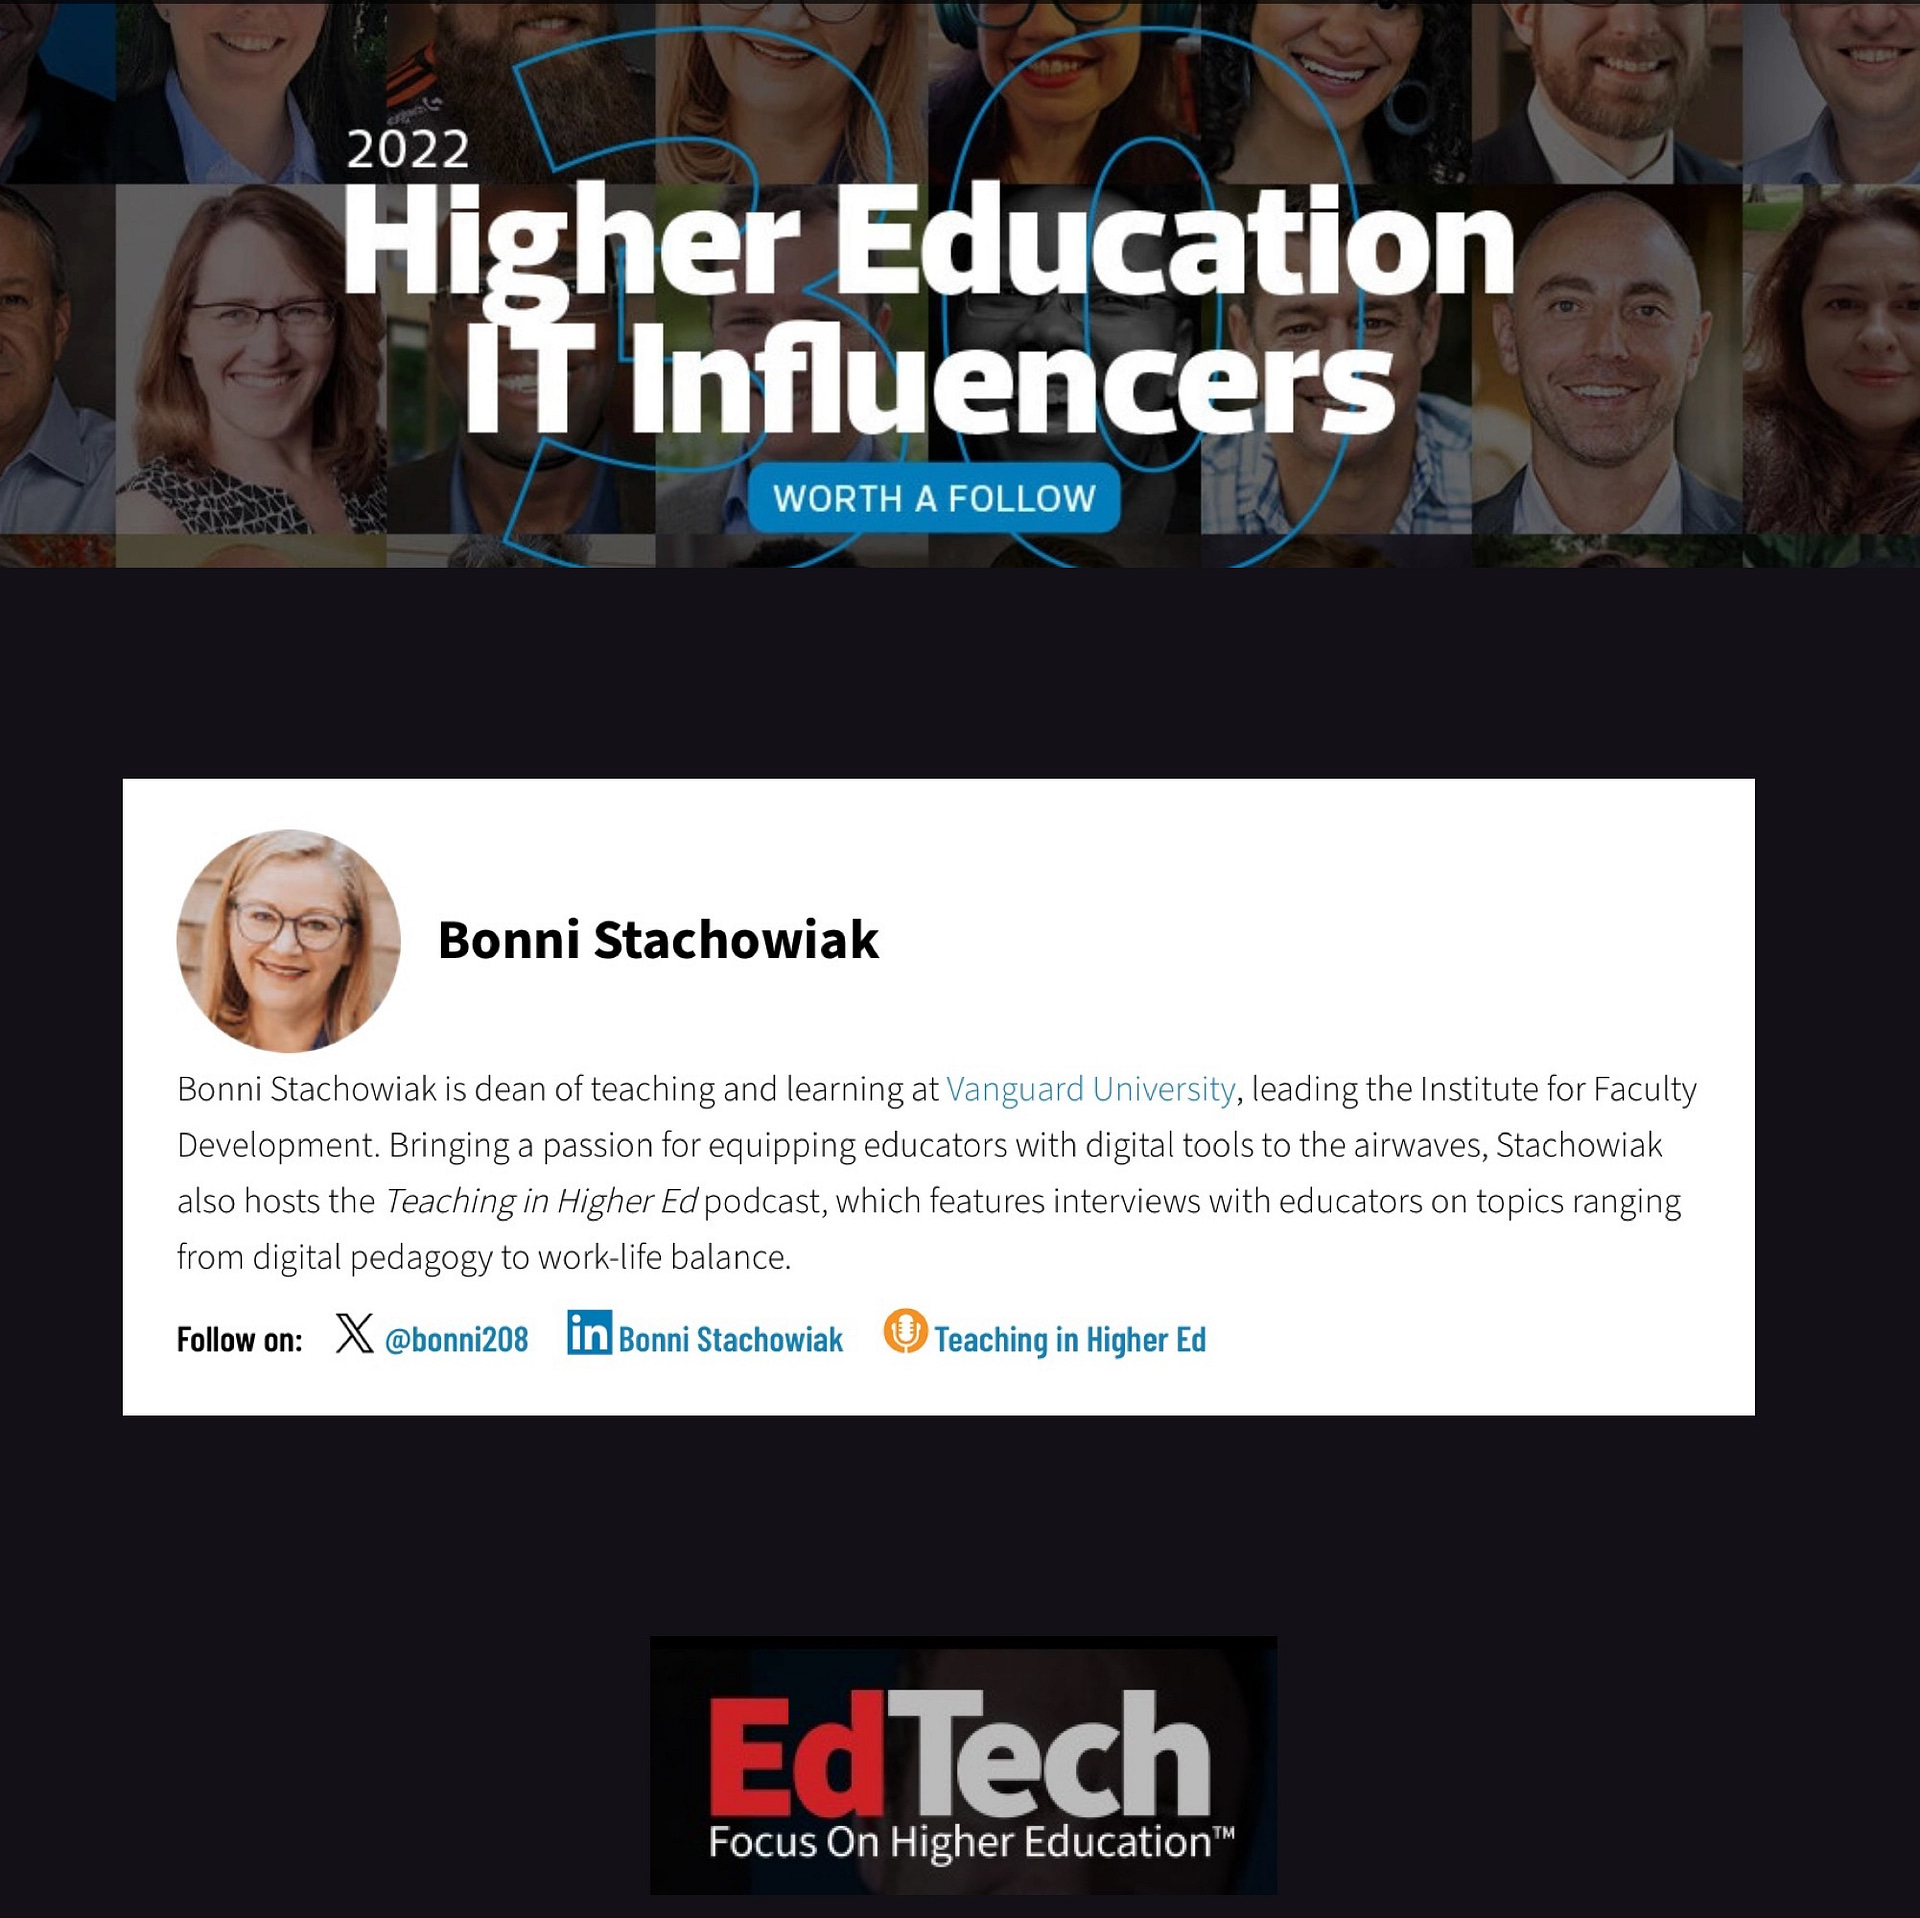 30 higher education IT influencers to follow in 2022: Bonni Stachowiak